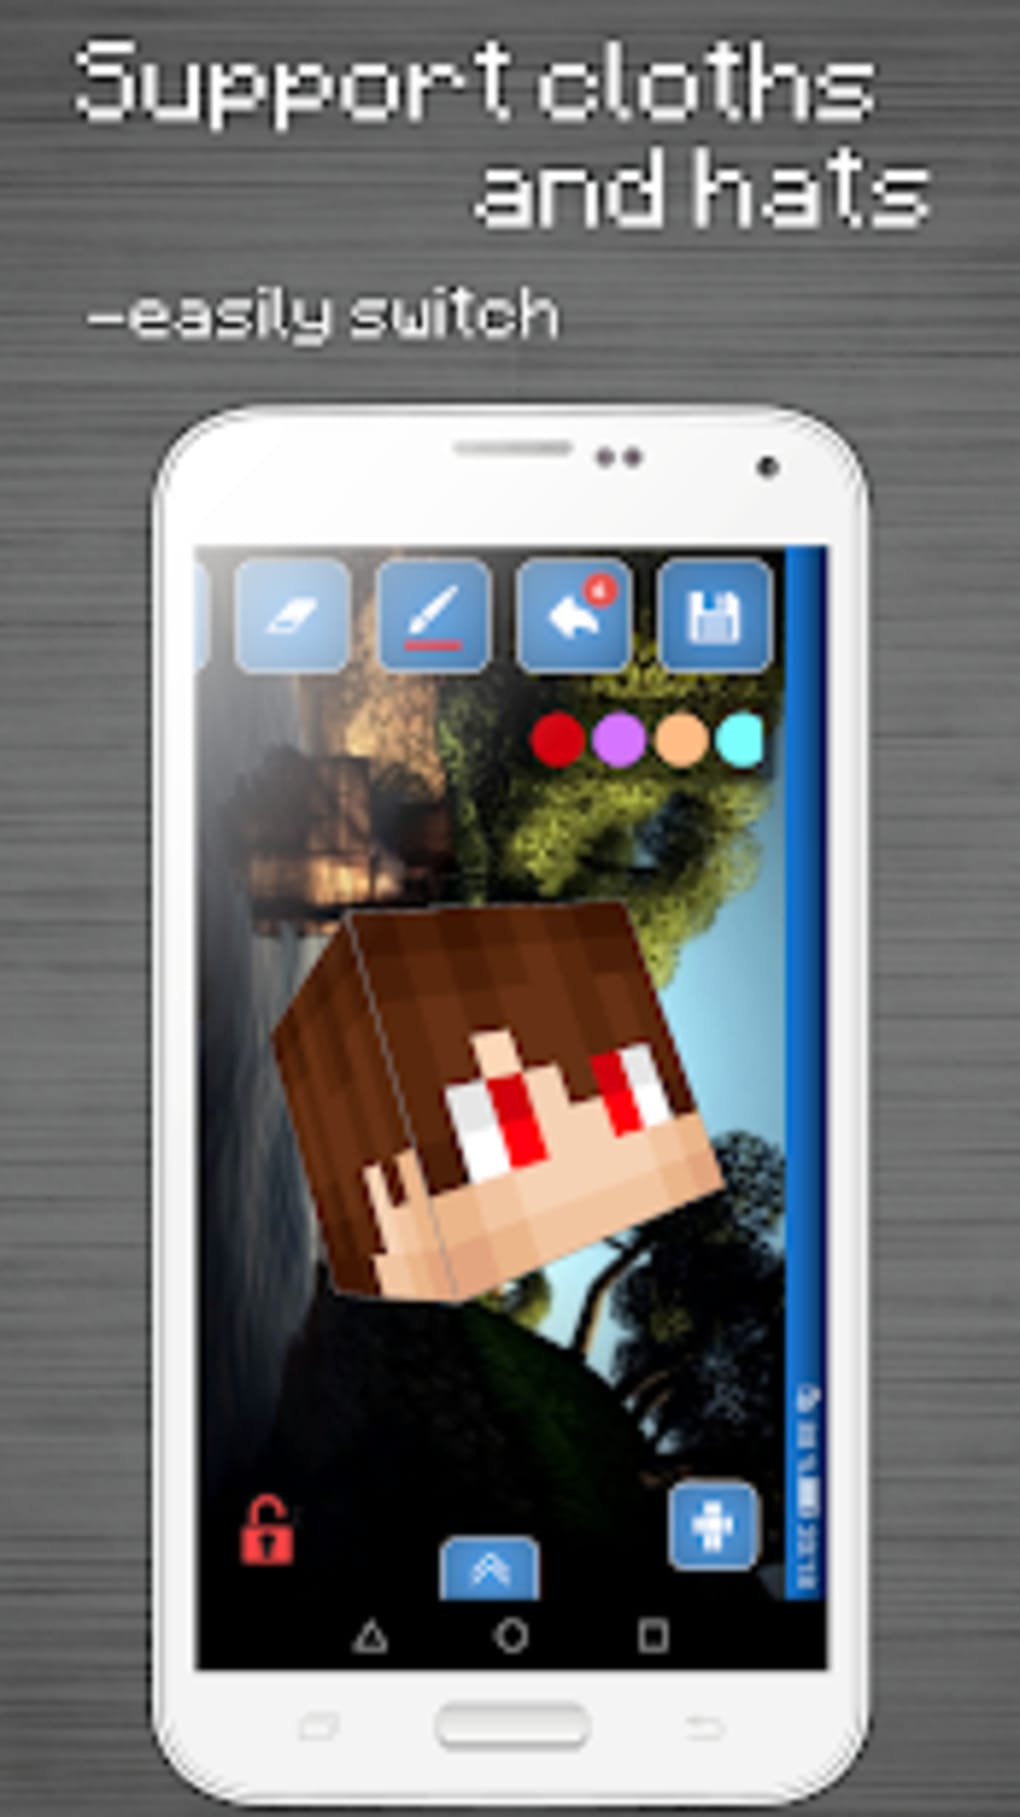 Skin Editor 3D for Minecraft APK Download for Android Free